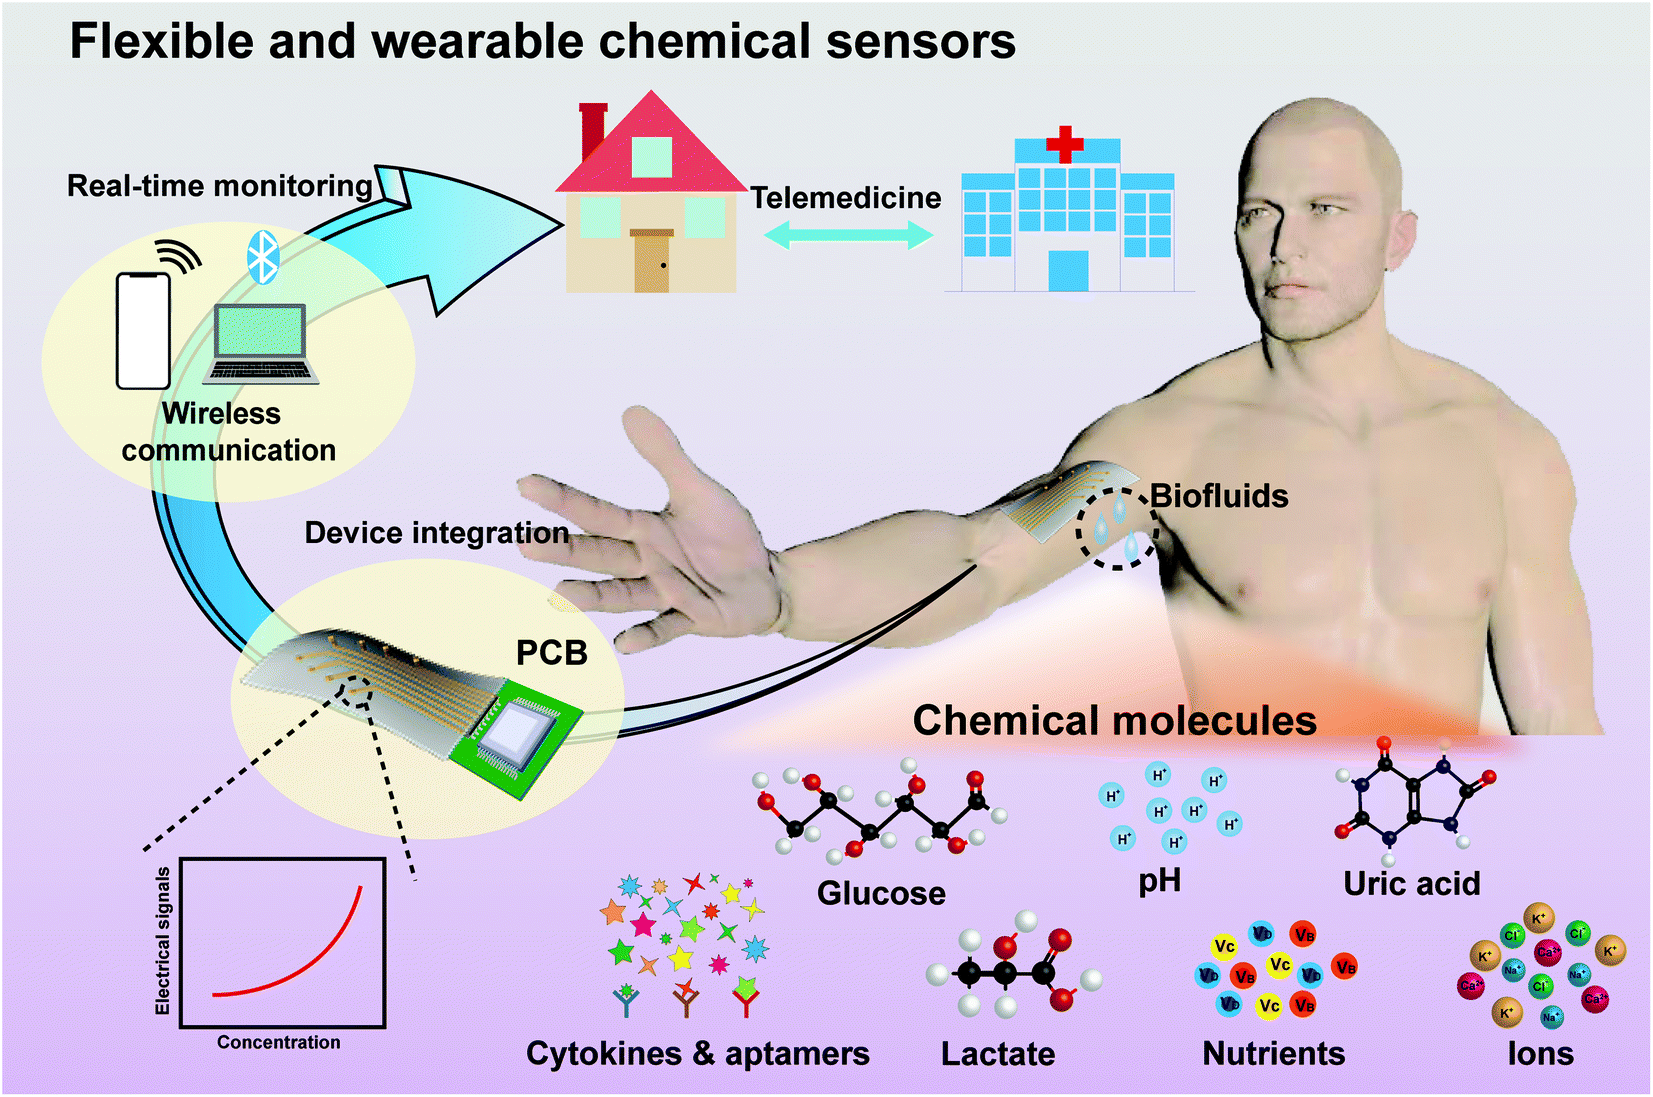 Recent Advances In Flexible And Wearable Sensors For Monitoring Chemical Molecules Nanoscale 9749